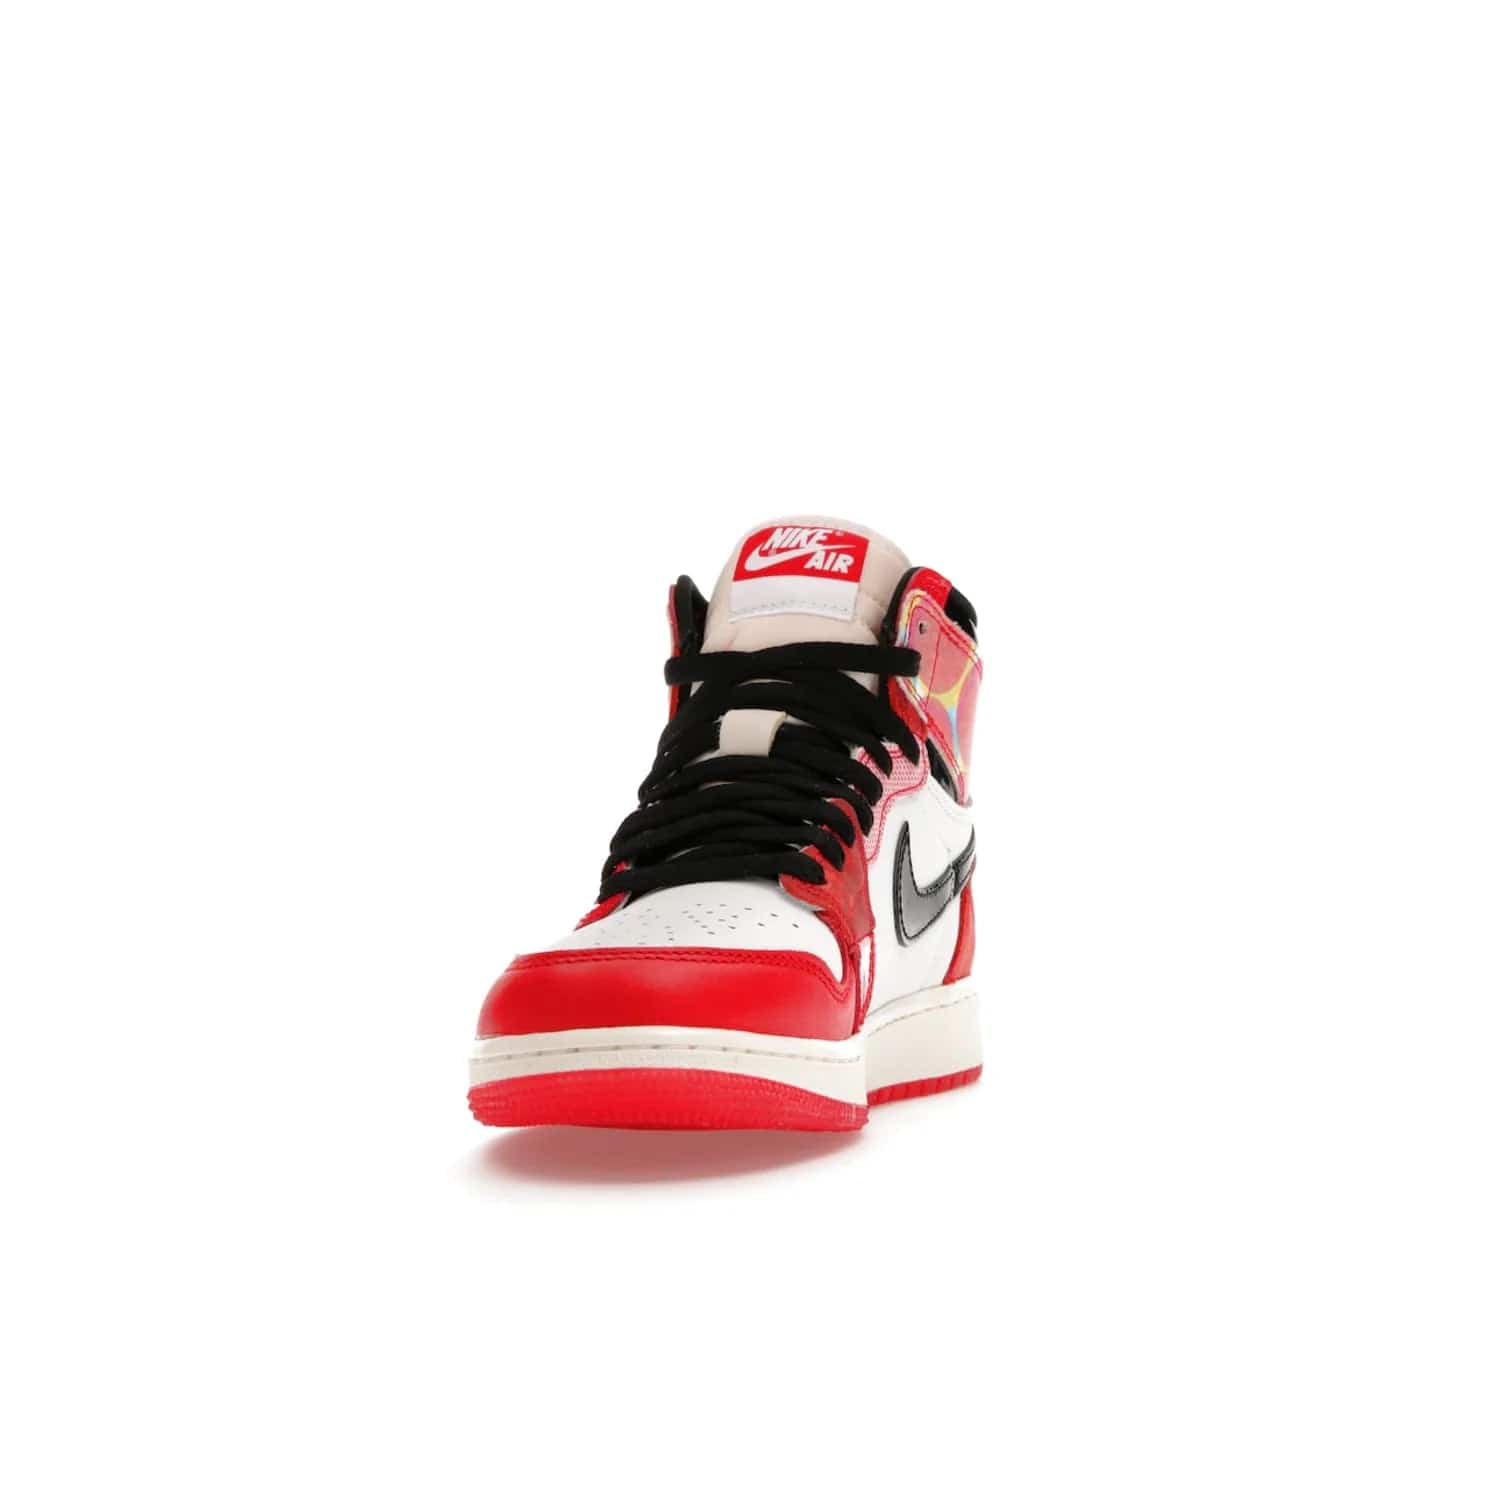 Jordan 1 High OG Spider-Man Across the Spider-Verse (GS) - Image 12 - Only at www.BallersClubKickz.com - Iconic basketball style Jordan 1 High OG Spider-Man Across the Spider-Verse hits the streets May 20th. University Red, Black, and White colorblocking and sleek design will make this shoe a must-have.